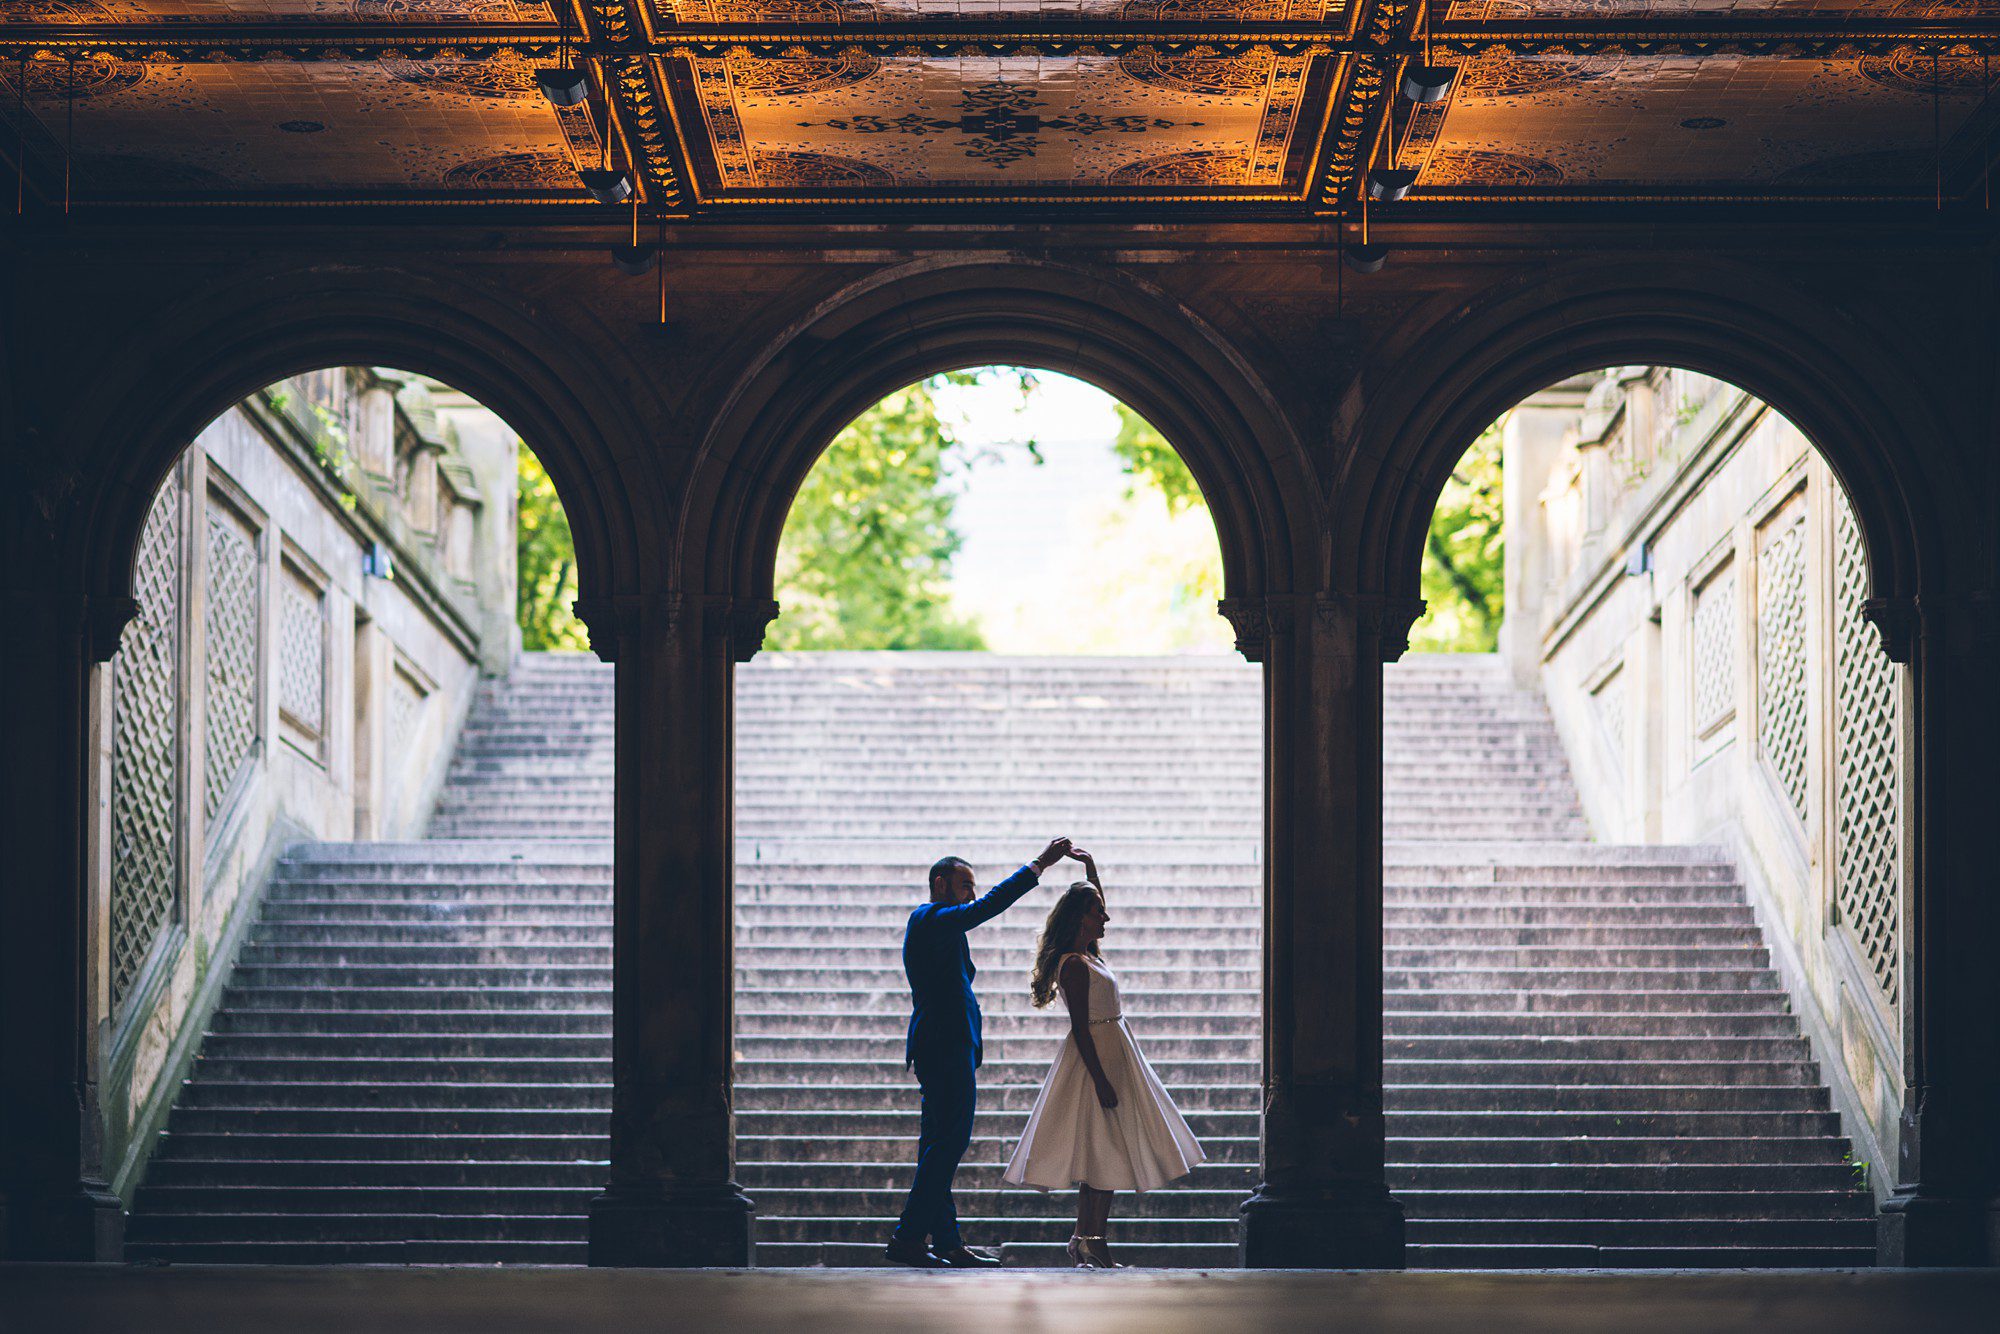 Elope in NYC